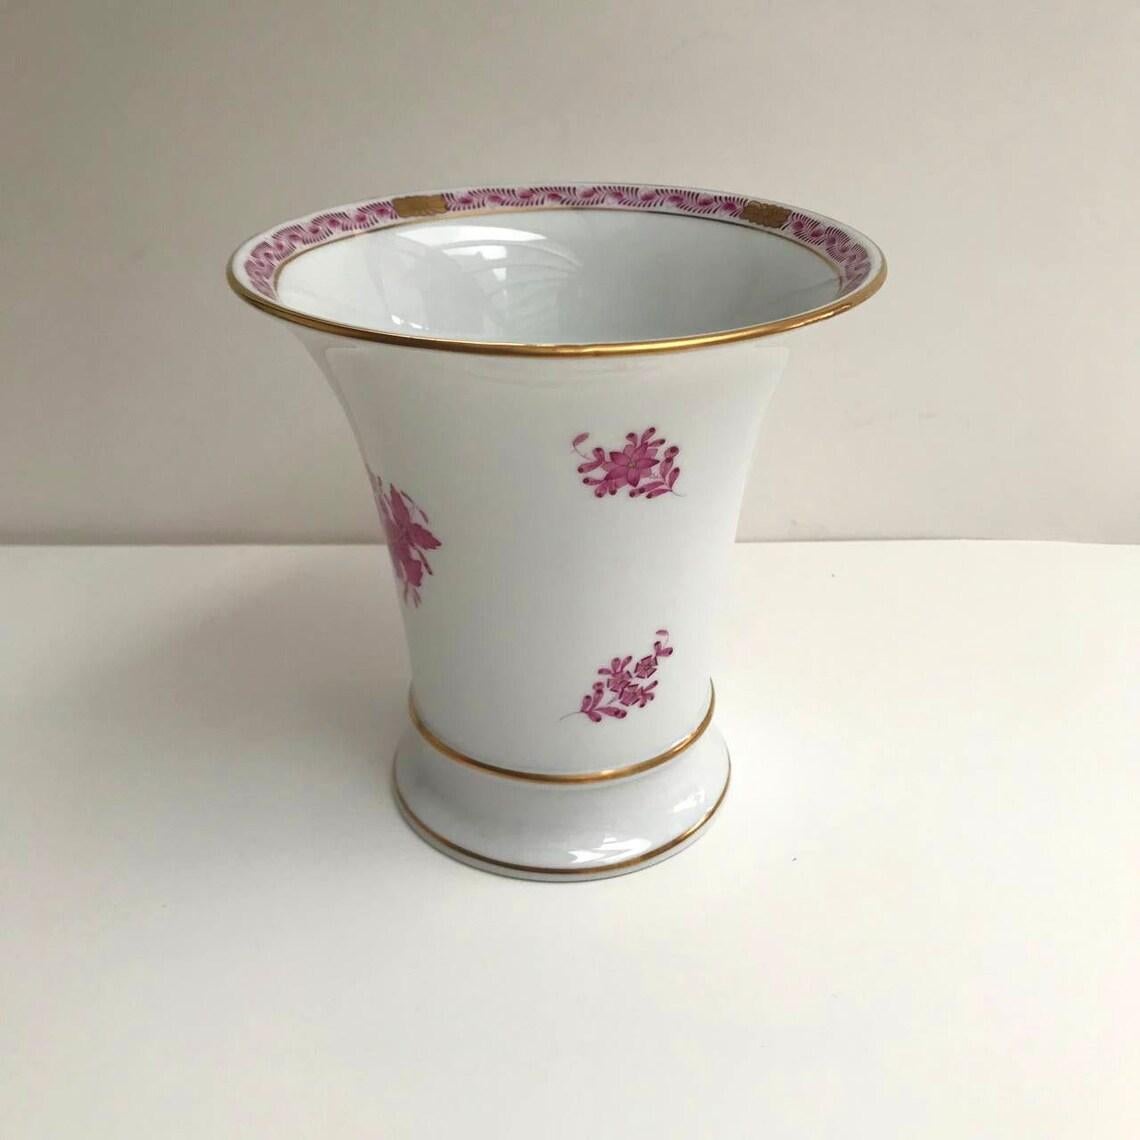 Herend flower vase.

Supplier of the Royal Court of England - premium Hungarian porcelain.

1970’s.

In excellent condition, no chips, cracks or crazing.


Dimensions:

Height: 5.9 inc 15 cm.
Diameter: 5.9 inc 15 cm.